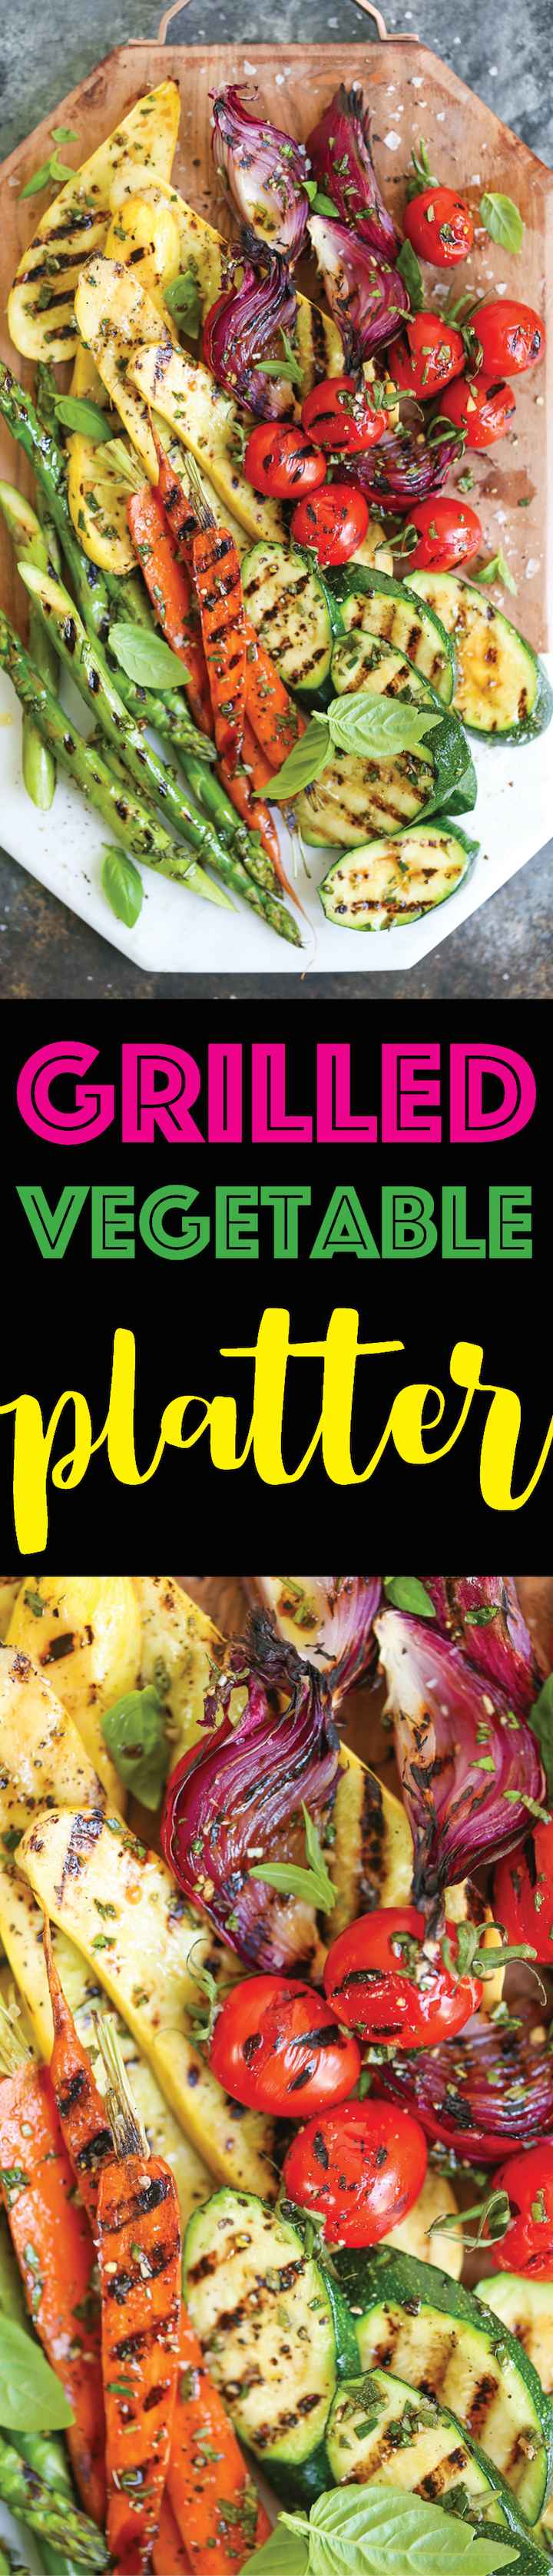 Grilled Vegetable Platter - How to assemble the most AMAZING vegetable platter! No more sad-looking veggies, so so perfect for entertaining!